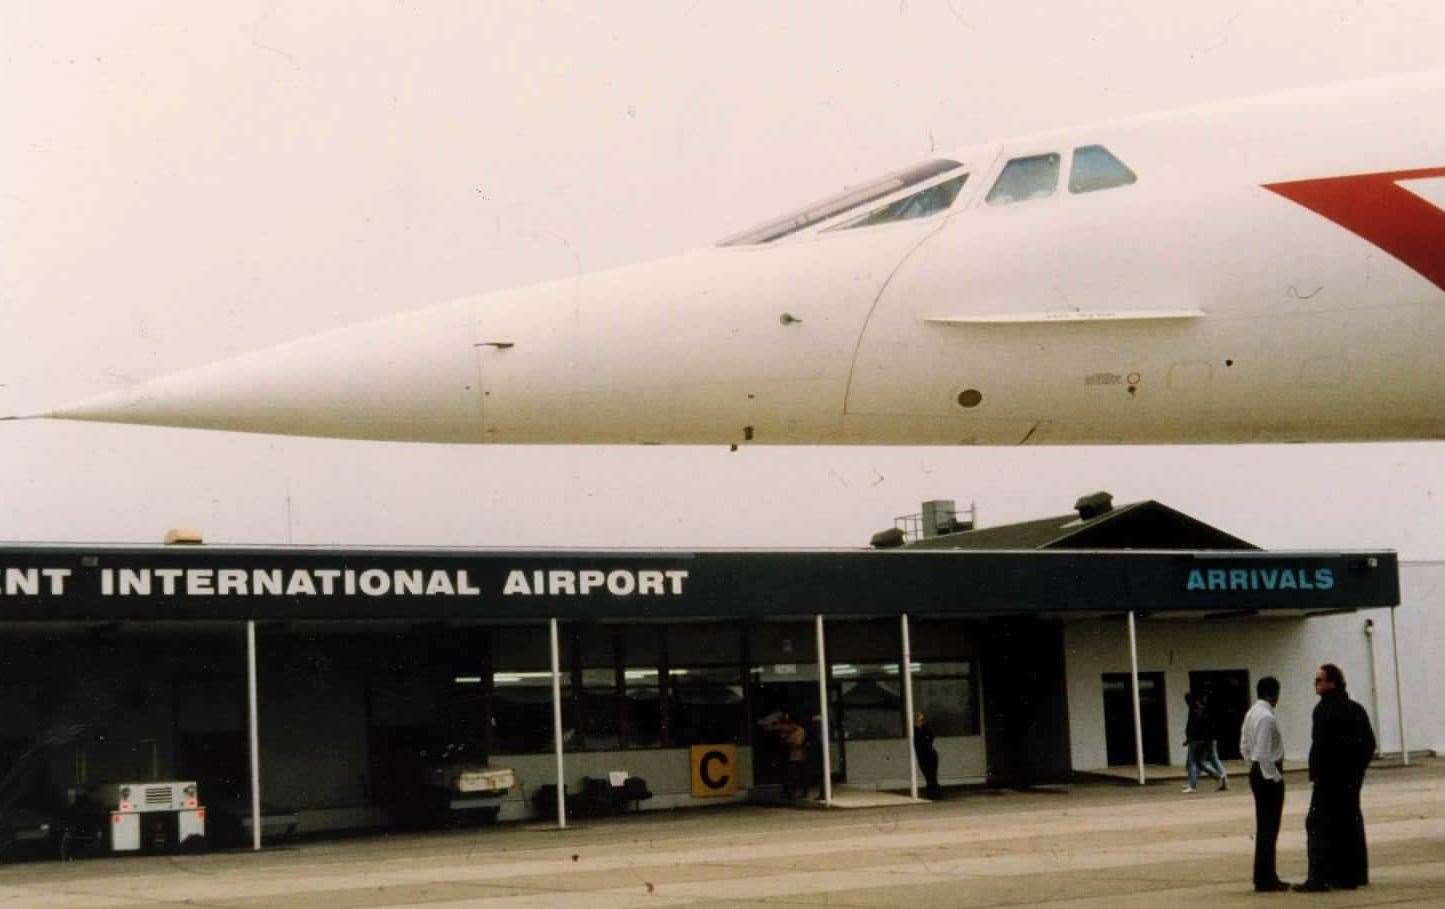 Even supersonic jet Concorde was a visitor to Manston in 1992